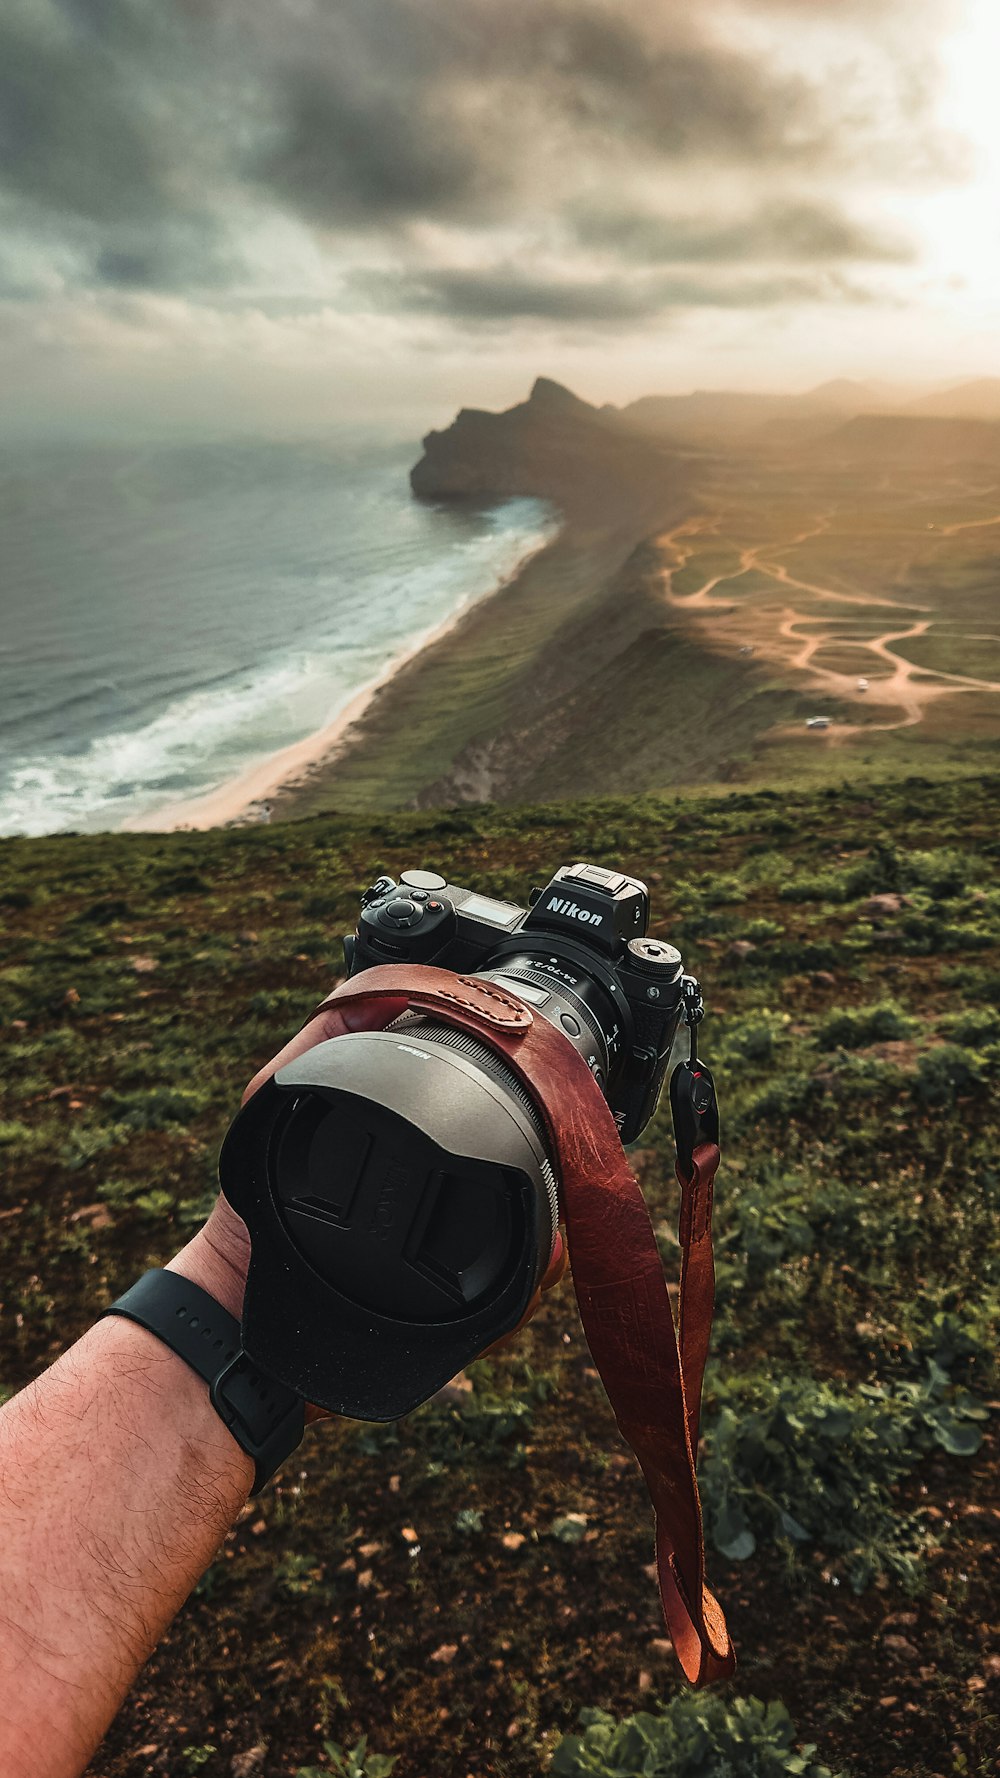 a person's hand holding a camera on a hill overlooking a beach